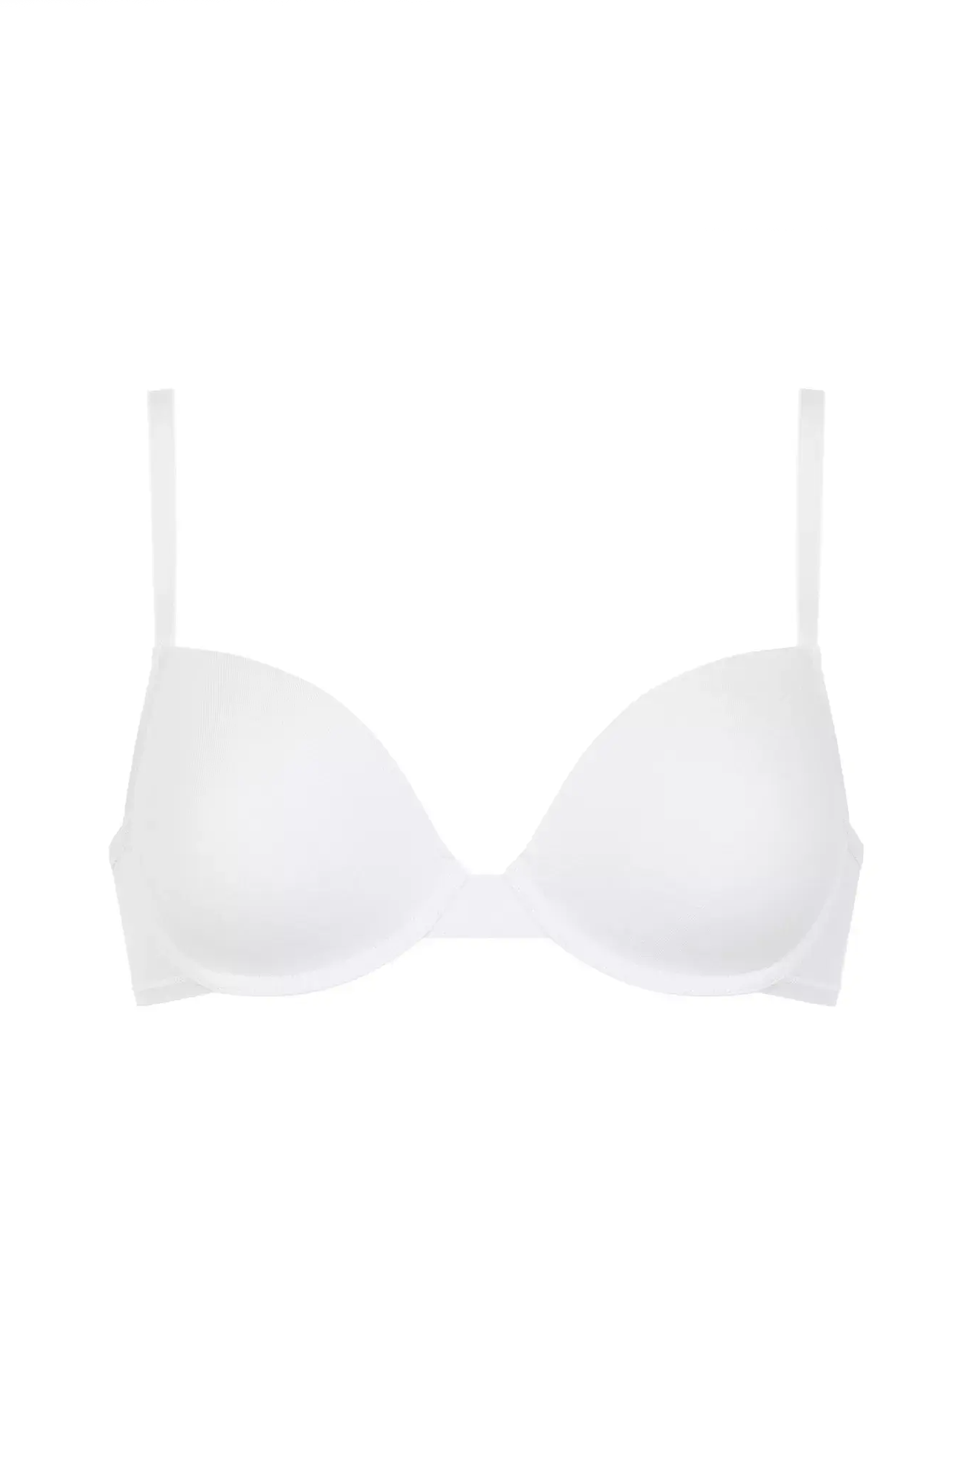 Modal Cotton! Lightly-Lined Anti-Slip Strapless Wireless, 51% OFF